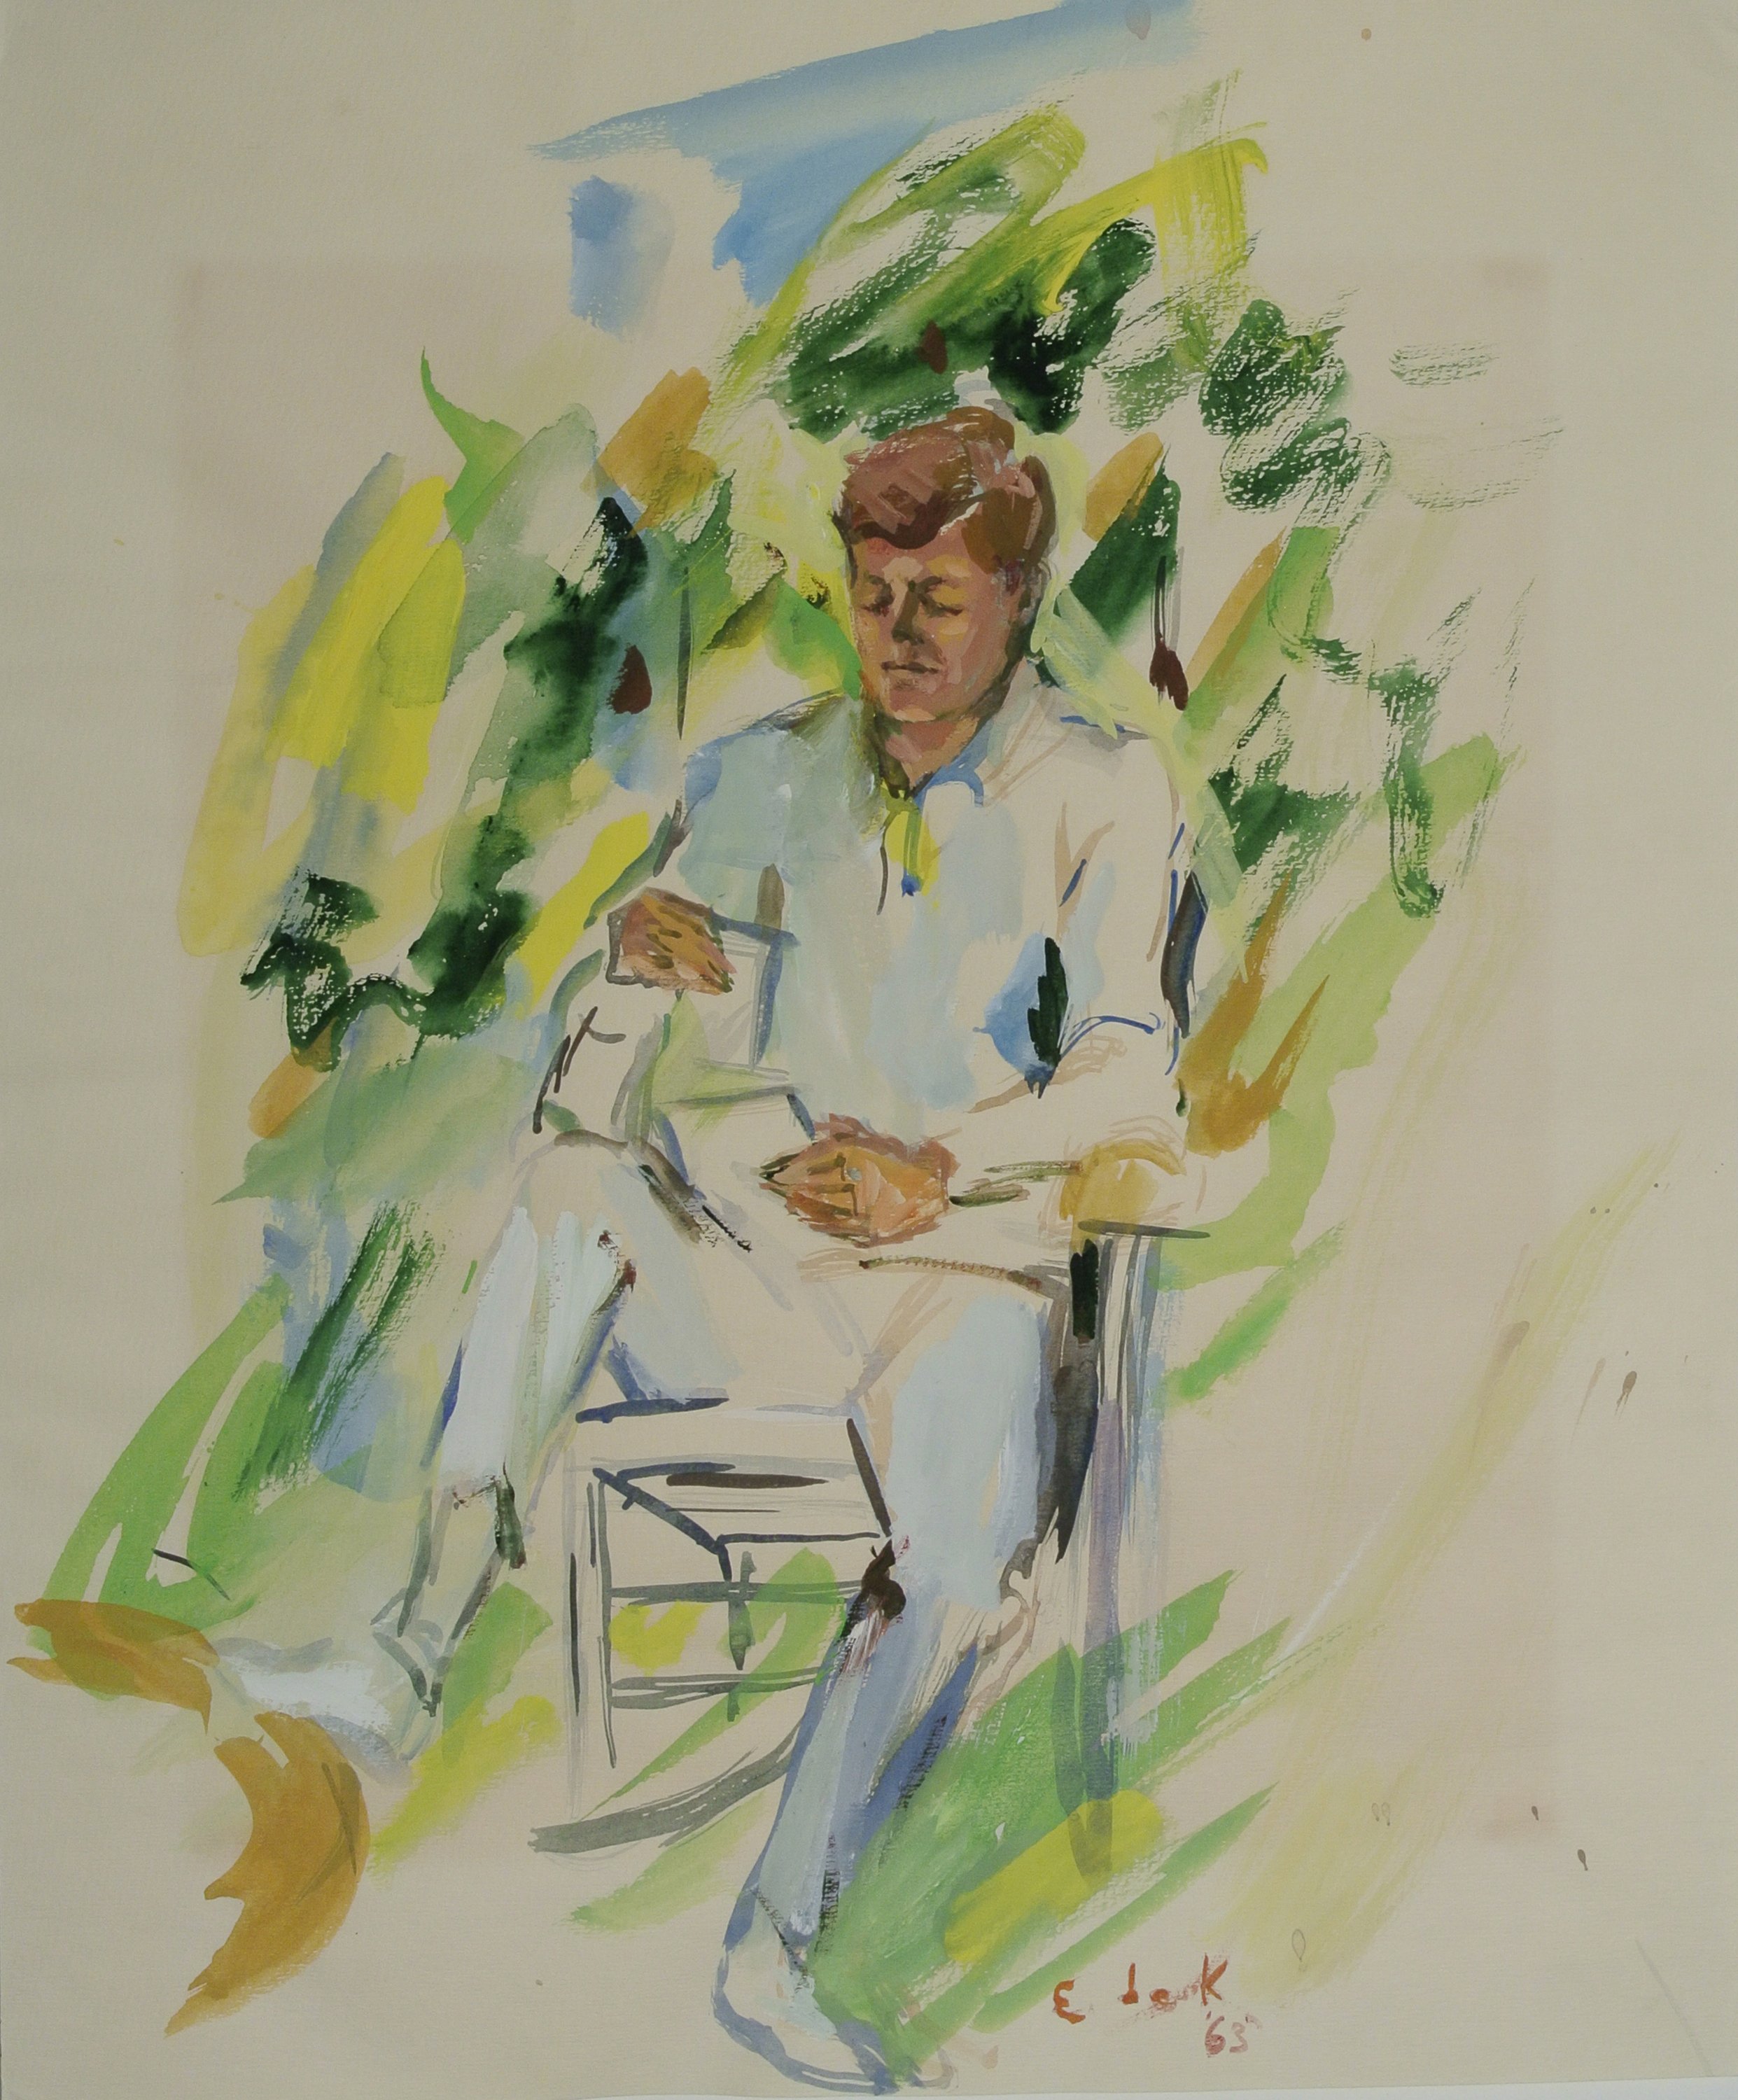   ELAINE de KOONING,  (American, 1918–1989),  Portrait of John F. Kennedy , 1963, Watercolor on paper, 18 x 14 7/8 inches, Gift of Mrs. Malcolm Shelton 